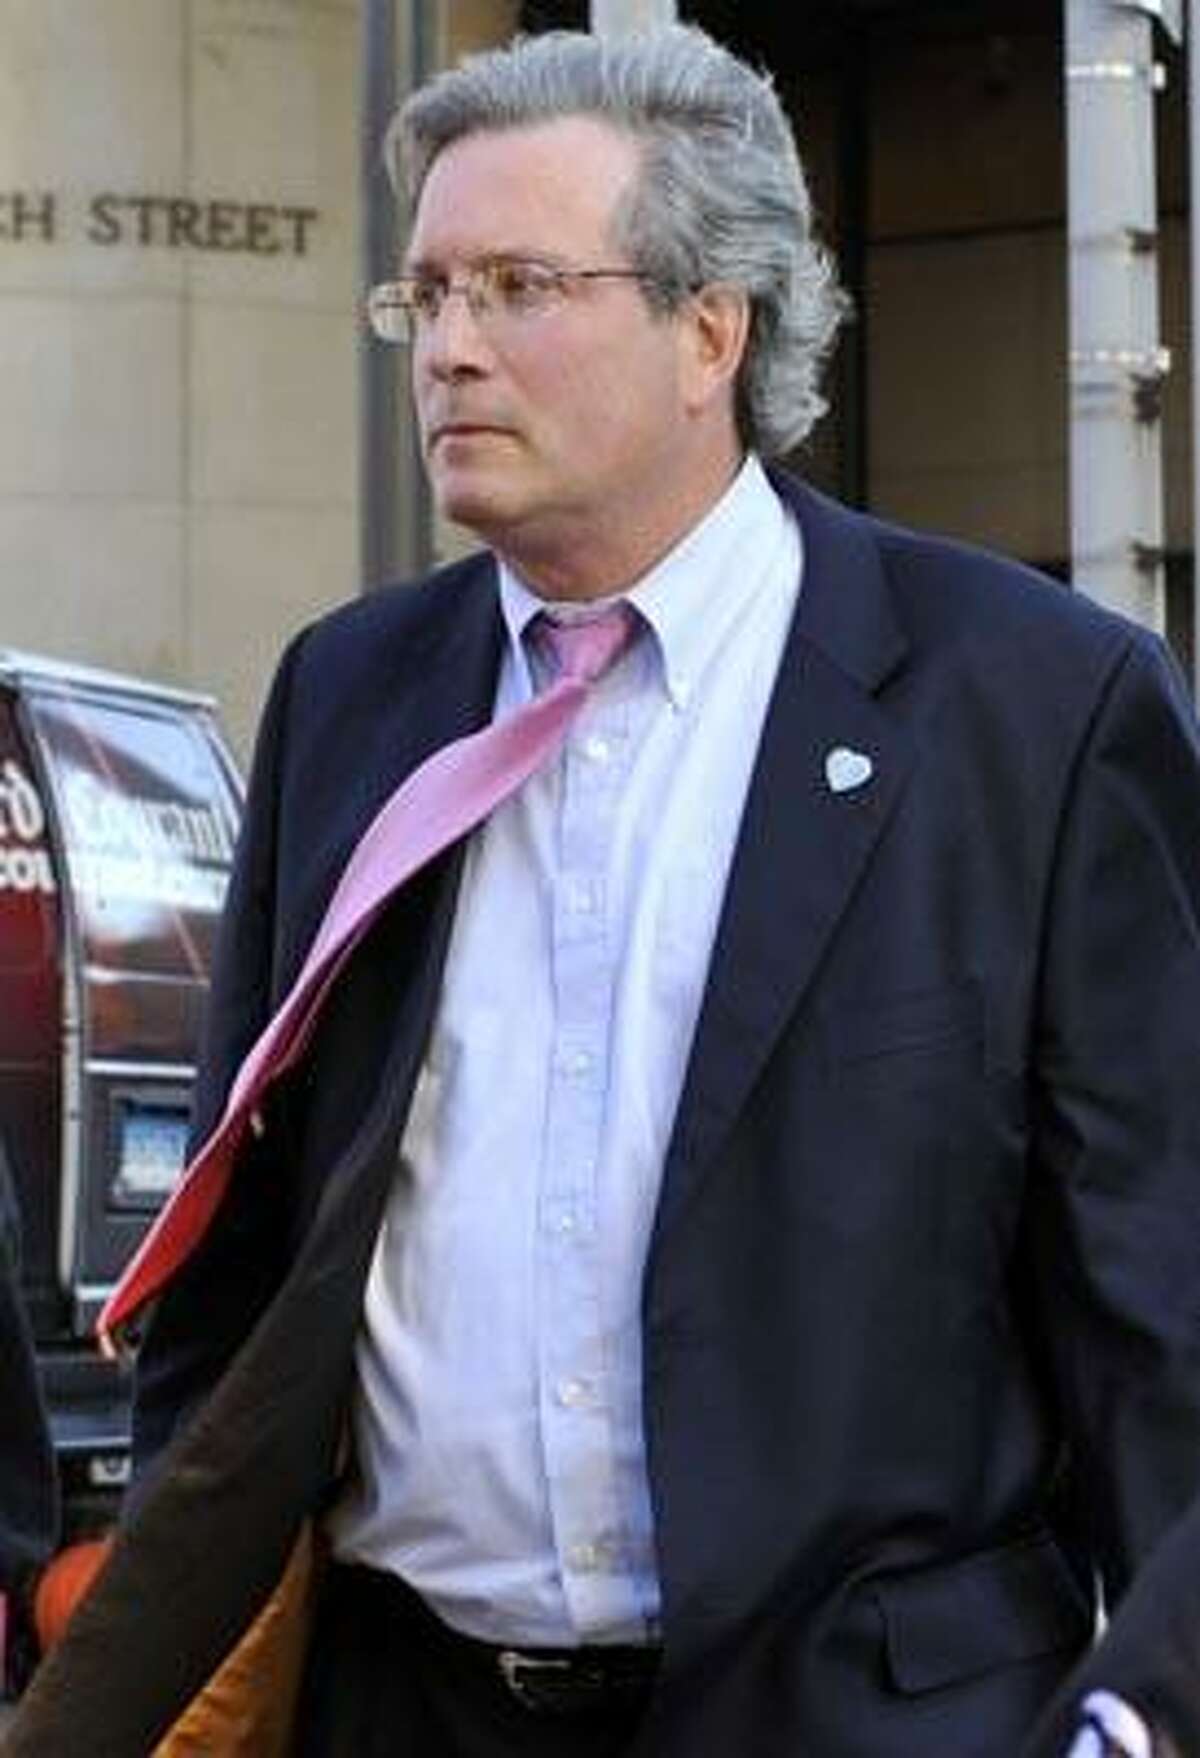 Dr. William Petit Jr. leaves Superior Court in New Haven, Conn., after the sentencing of Steven Hayes, Thursday, Dec. 2, 2010. Hayes has been convicted and sentenced to death for the murder of Petit's wife, Jennifer Hawke-Petit, and two children, Hayley and Michaela. (AP Photo/Jessica Hill)